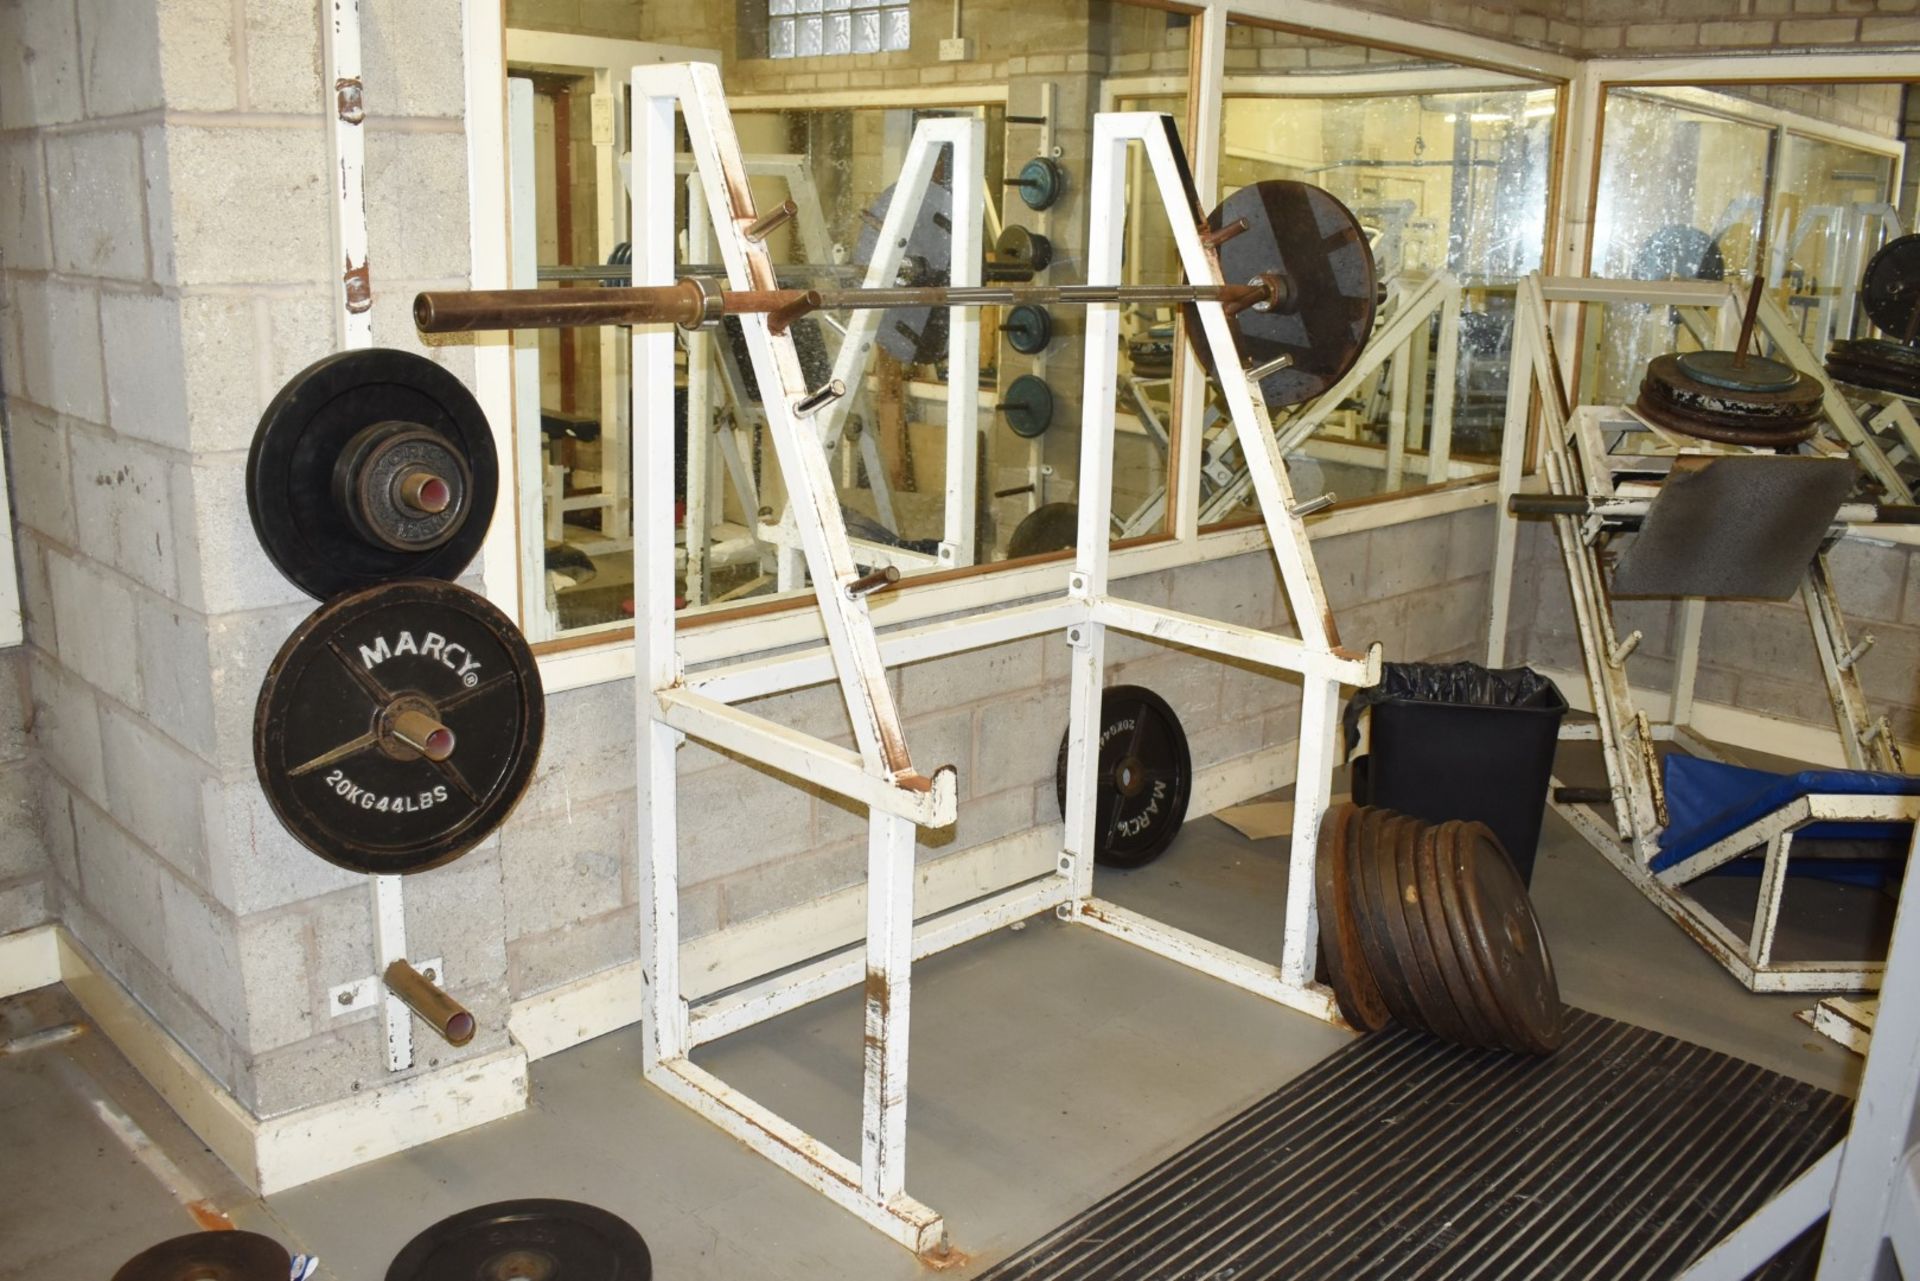 Contents of Bodybuilding and Strongman Gym - Includes Approx 30 Pieces of Gym Equipment, Floor Mats, - Image 42 of 95